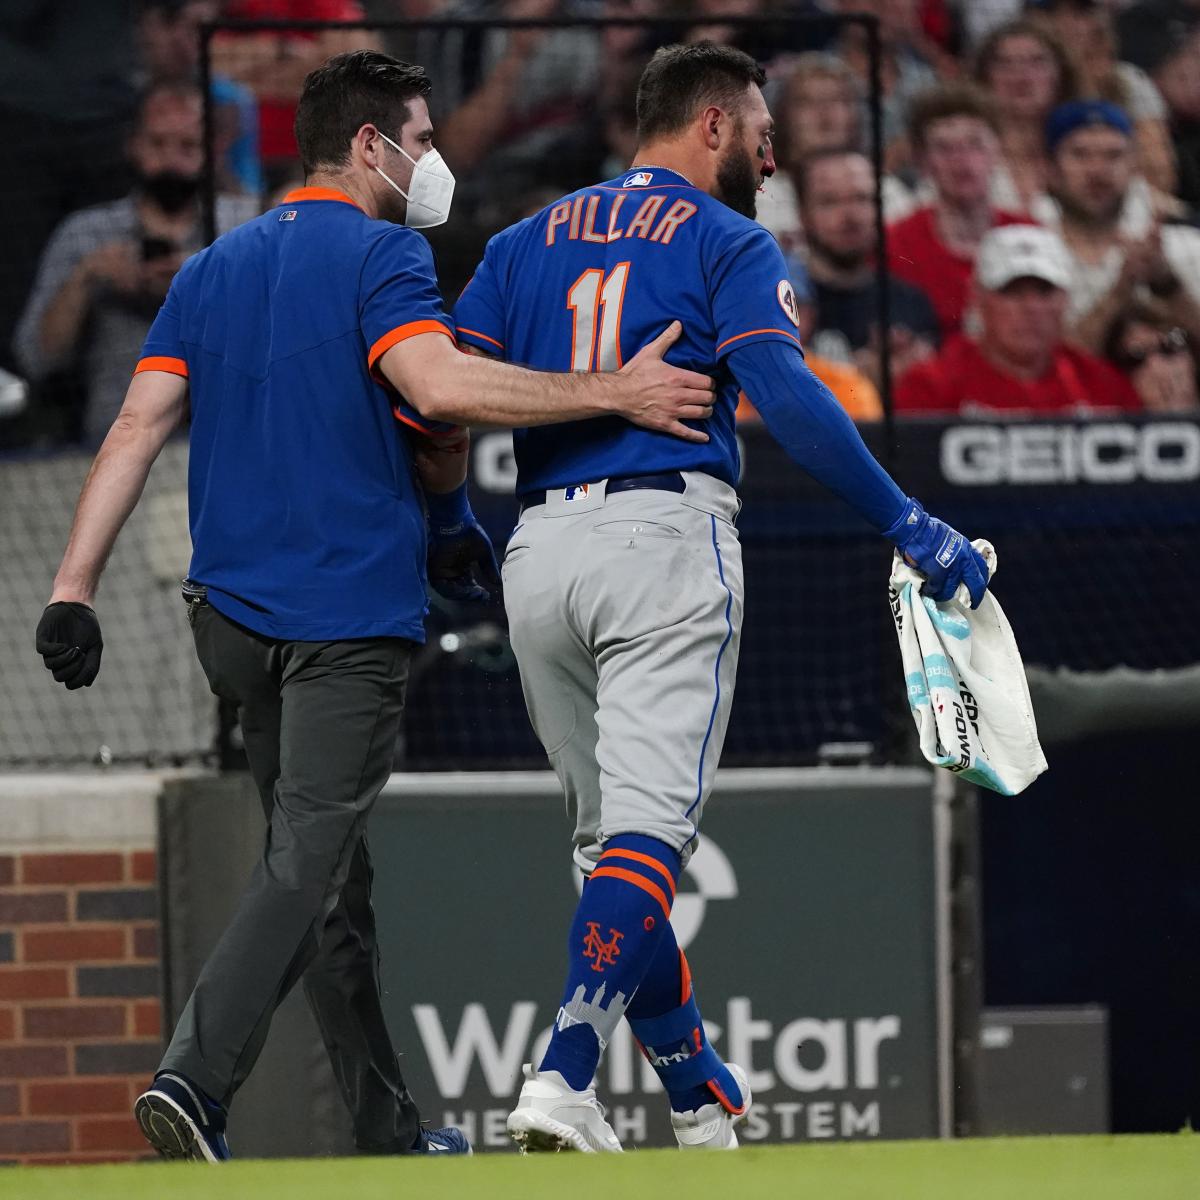 ATLANTA, GA – JUNE 29: New York center fielder Kevin Pillar (11) wears a  mask in the field during the MLB game between the New York Mets and the  Atlanta Braves on